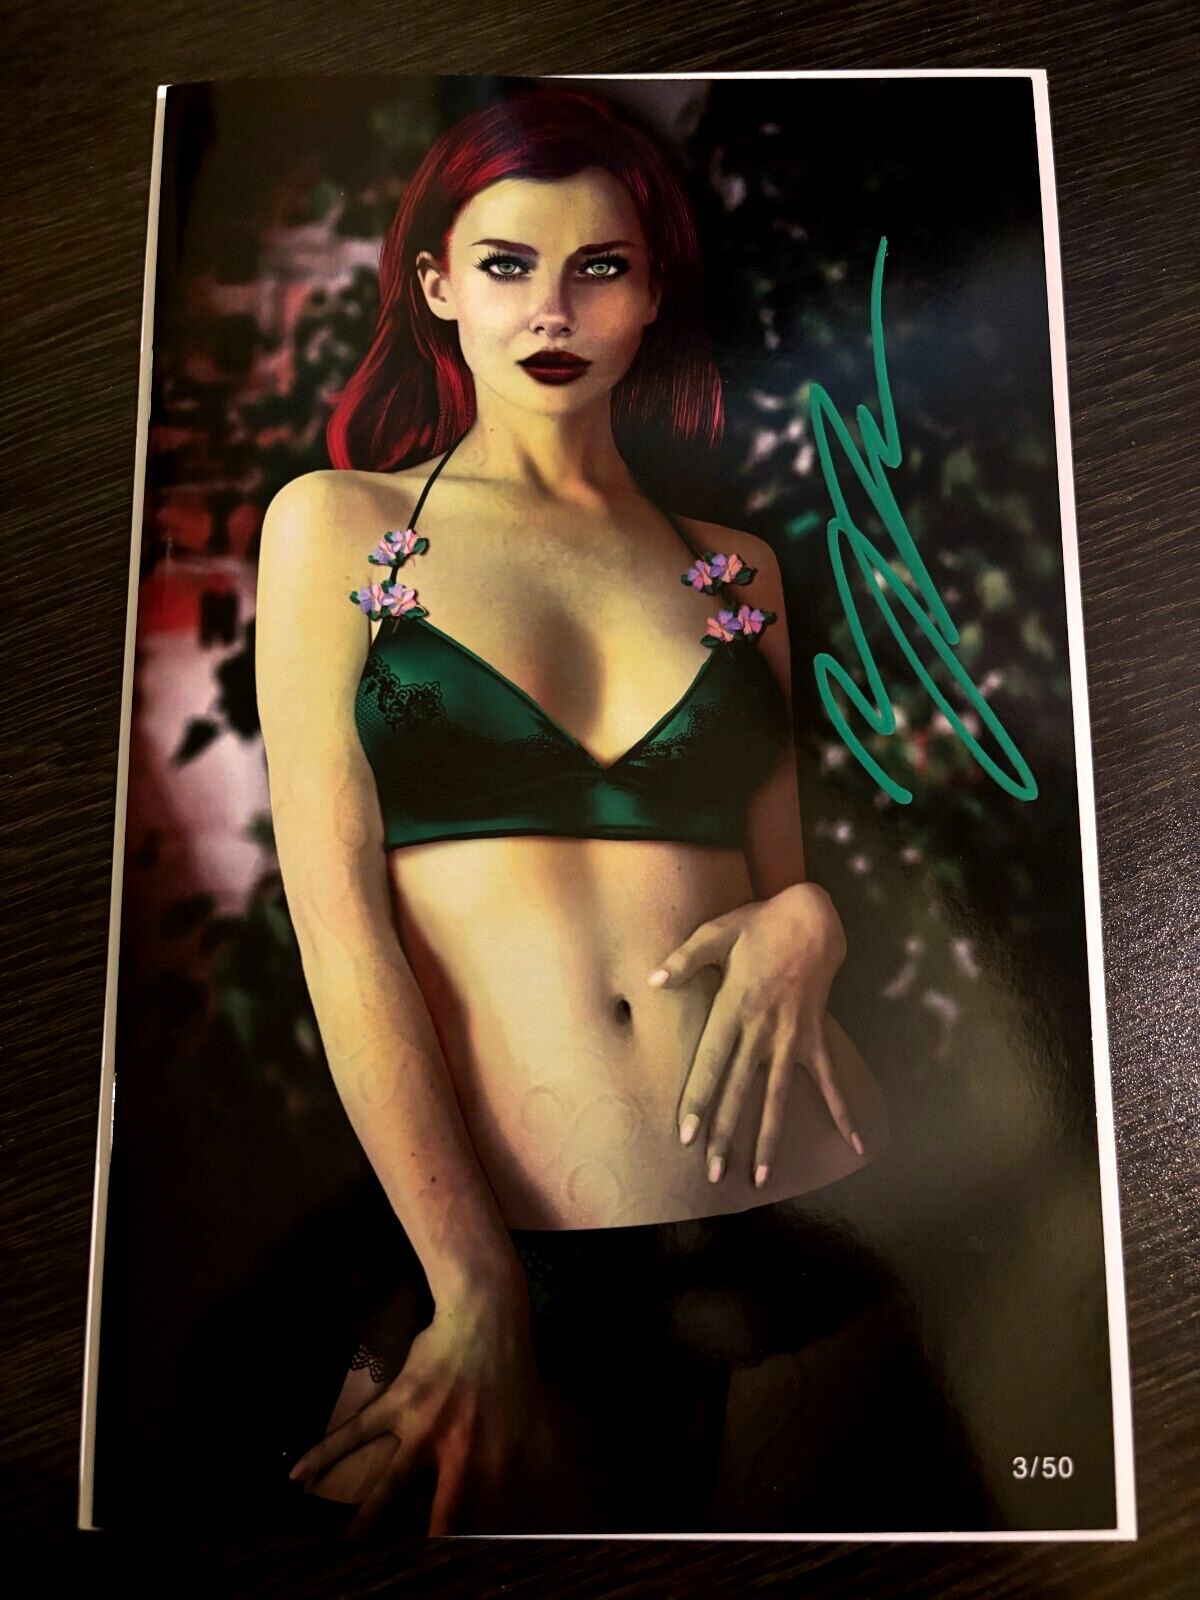 MAD LOVE #17 POISON IVY TAURUS EXCLUSIVE LINGERIE VIRGIN NUMBERED COA LTD 50 NM+